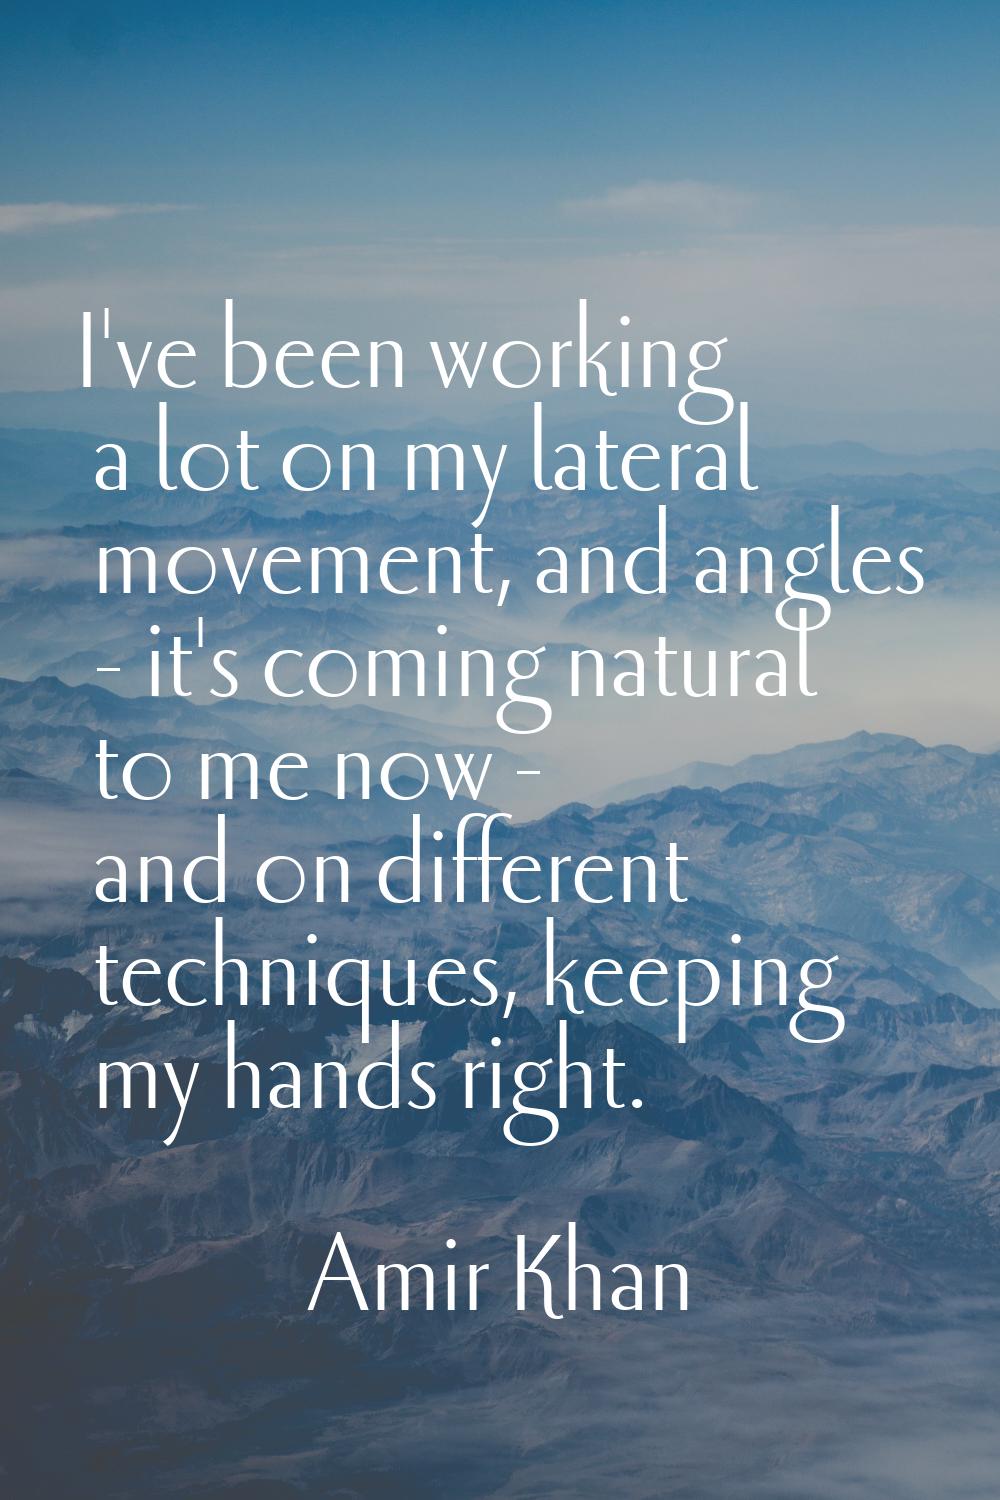 I've been working a lot on my lateral movement, and angles - it's coming natural to me now - and on